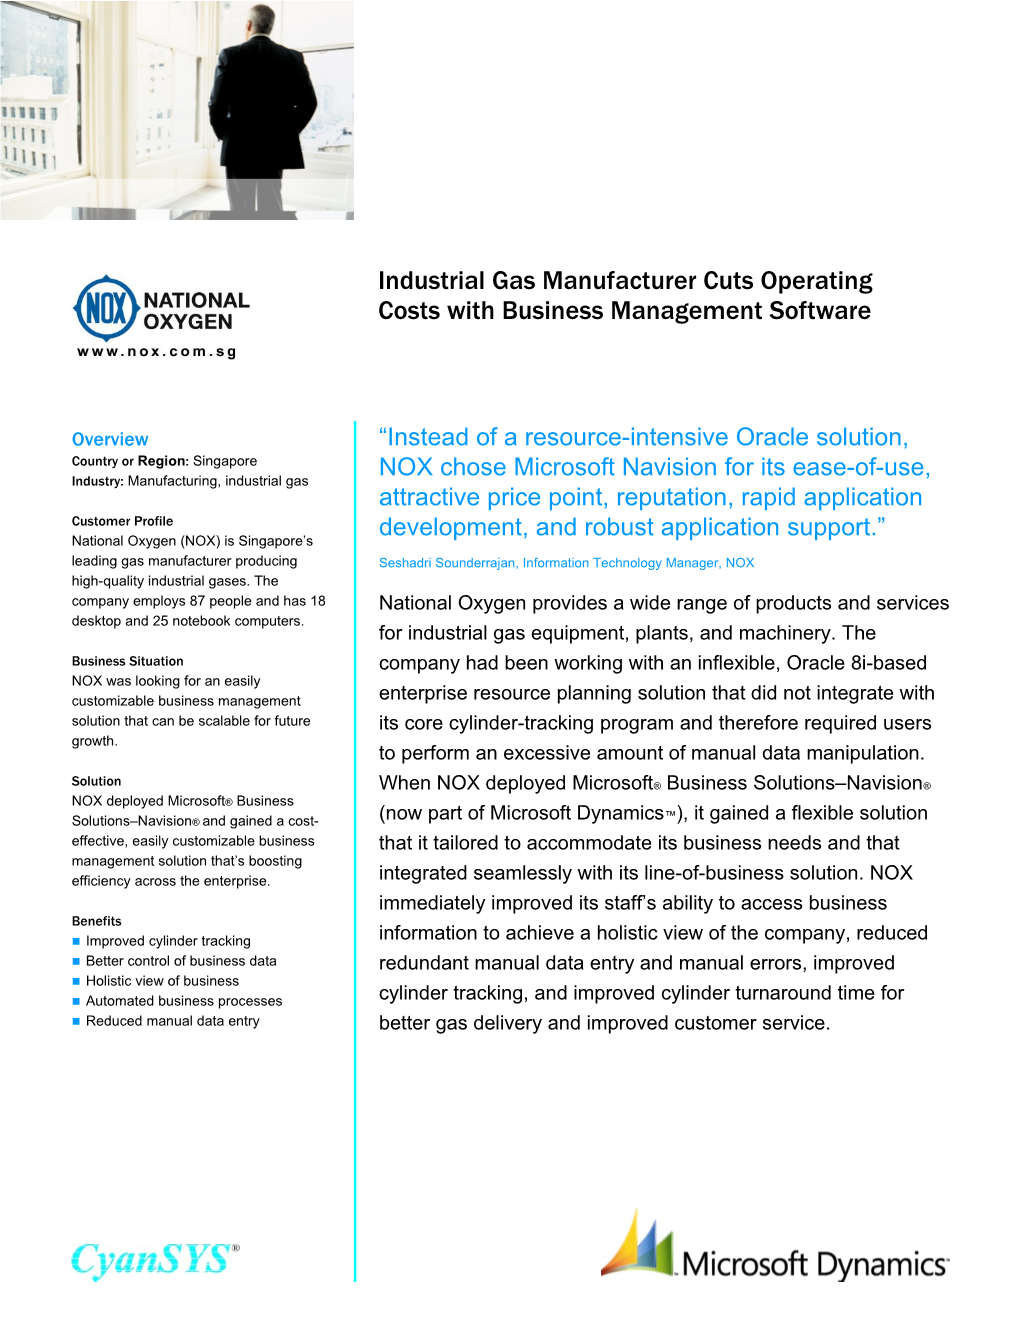 Industrial Gas Manufacturer Reduces Operating Costs with Business Management Software